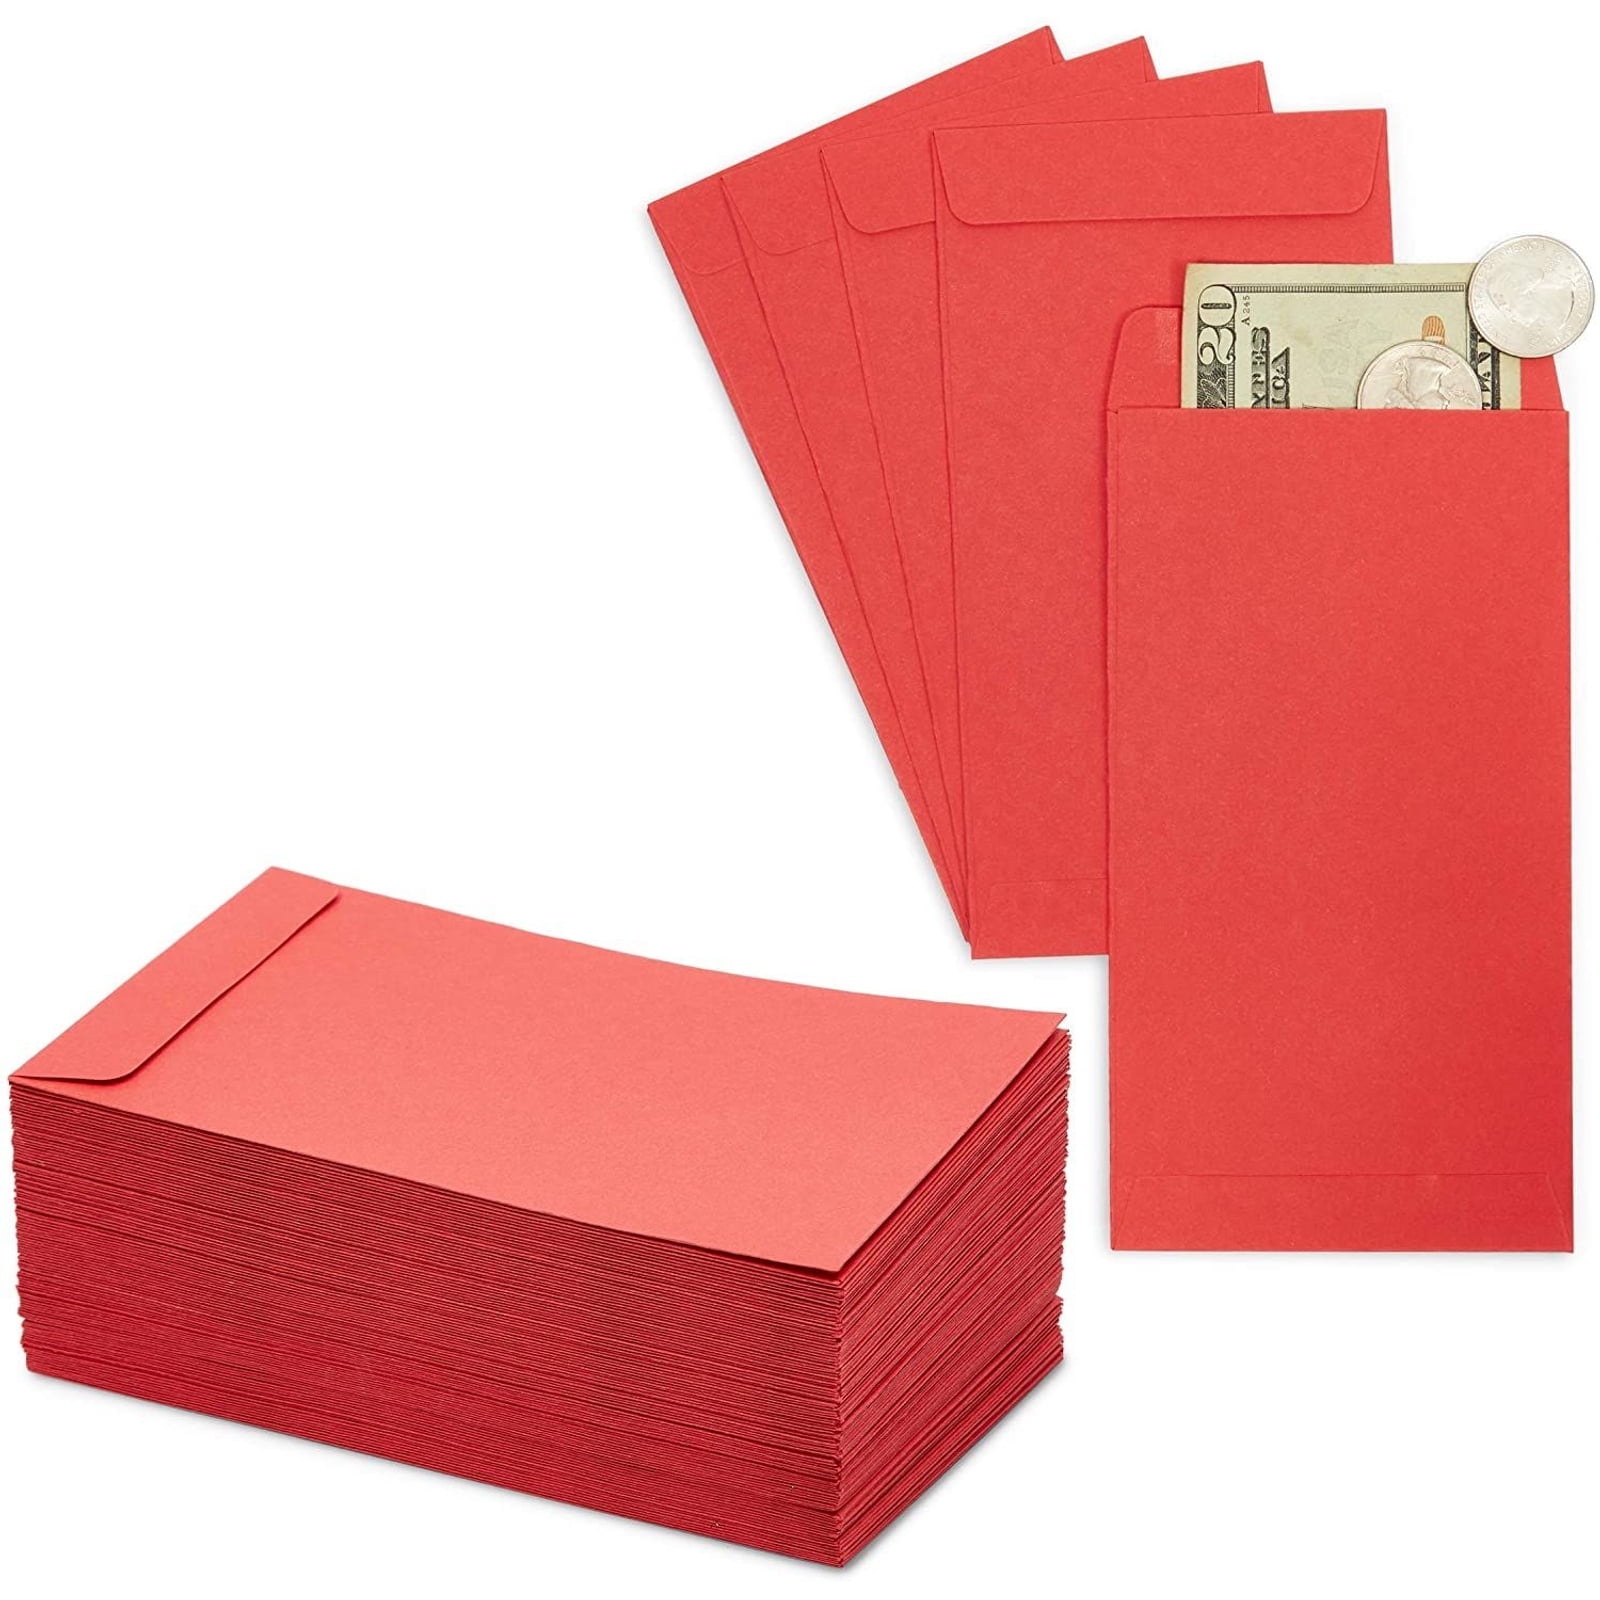 5 x 3.5 Small Cards Kraft Envelopes 100 Pack 5x 3.5 Brown Kraft envelopes for Gift Cards Envelopes Sized to Mail with USPS 